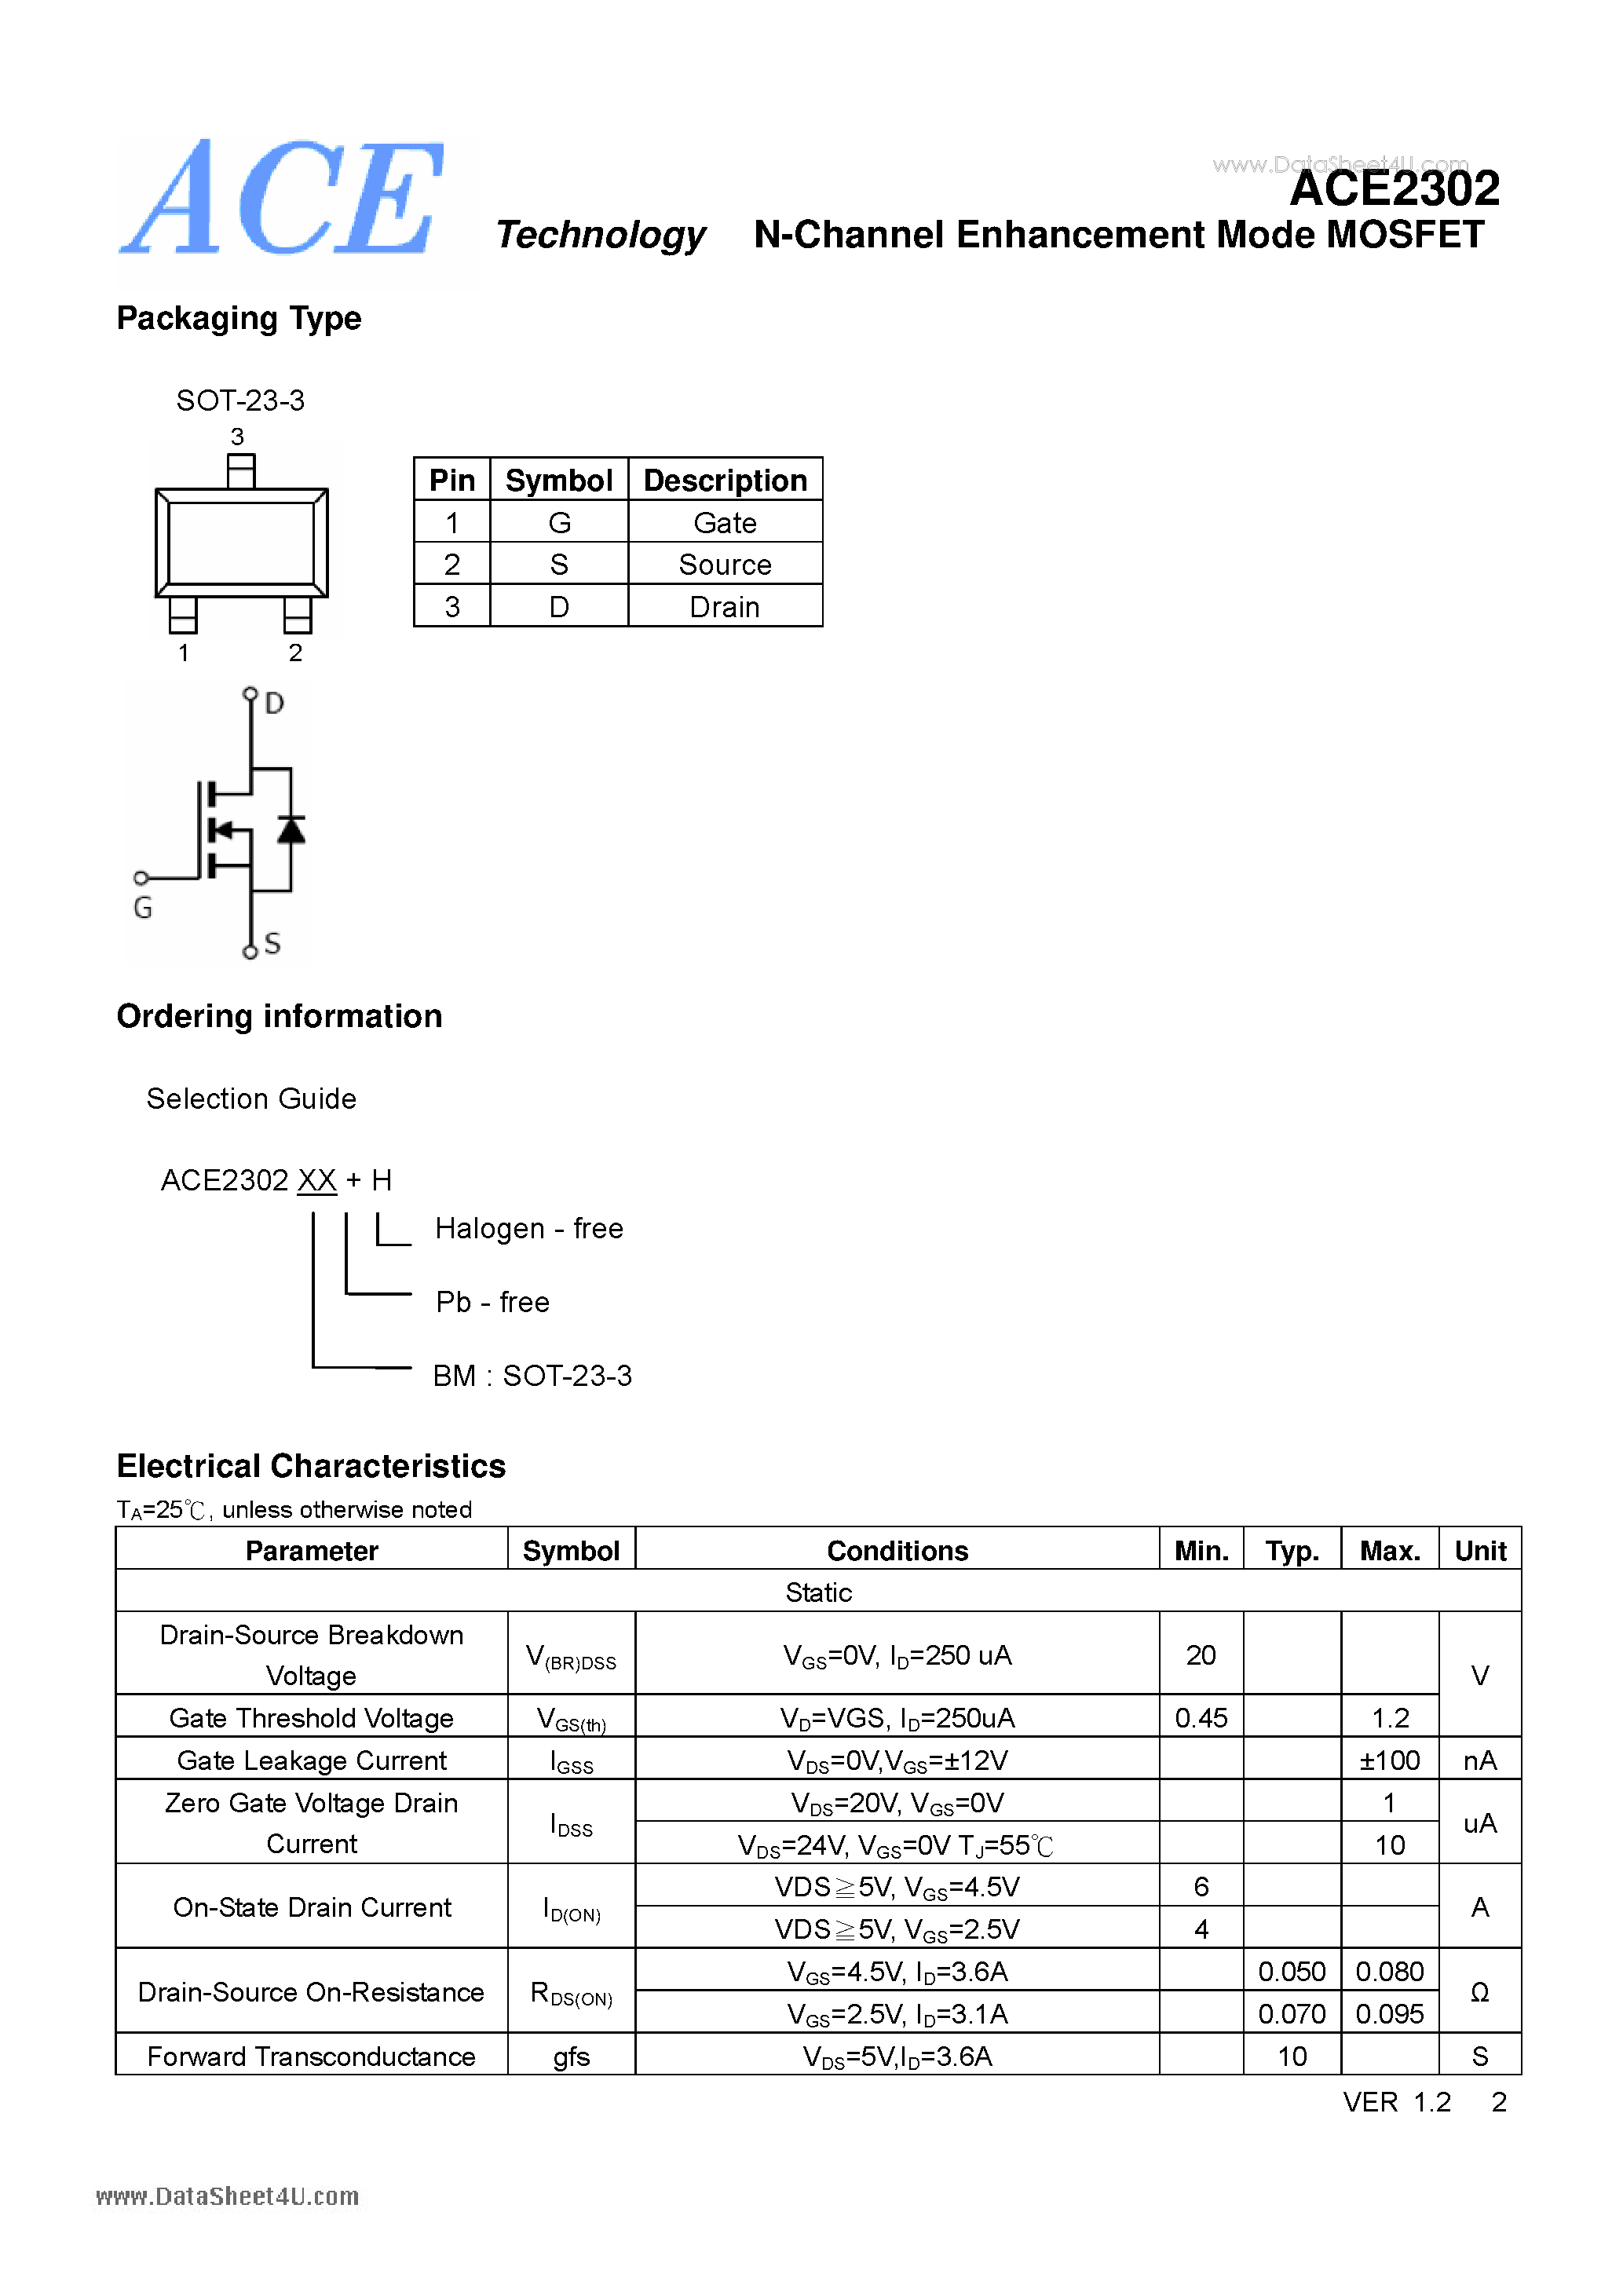 Даташит ACE2302 - N-Channel Enhancement Mode MOSFET страница 2